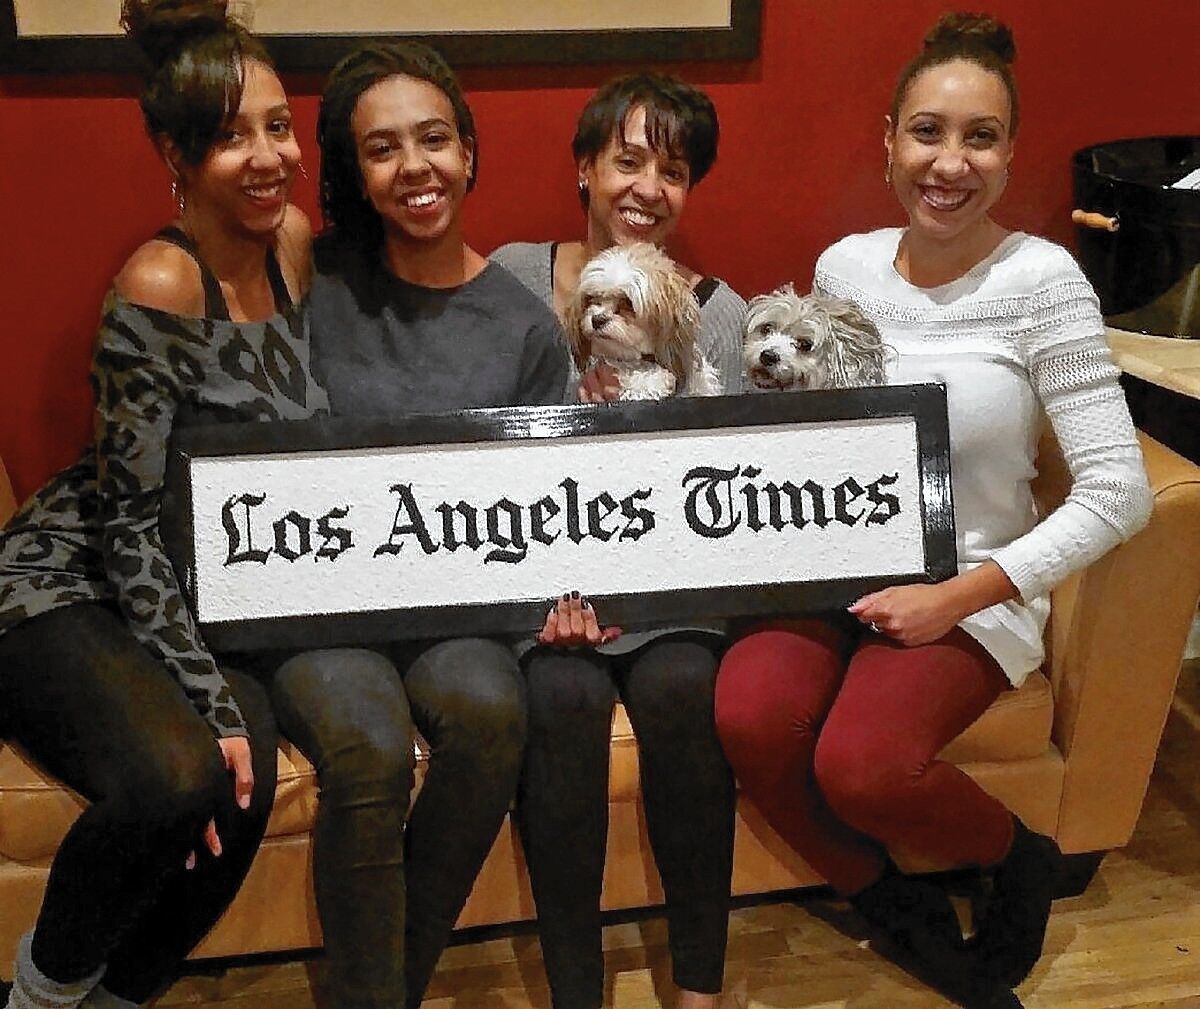 Sandy Banks, second from right, with daughters Danielle, Brittany and Alyssa Robinson and dogs Lola and Rio.